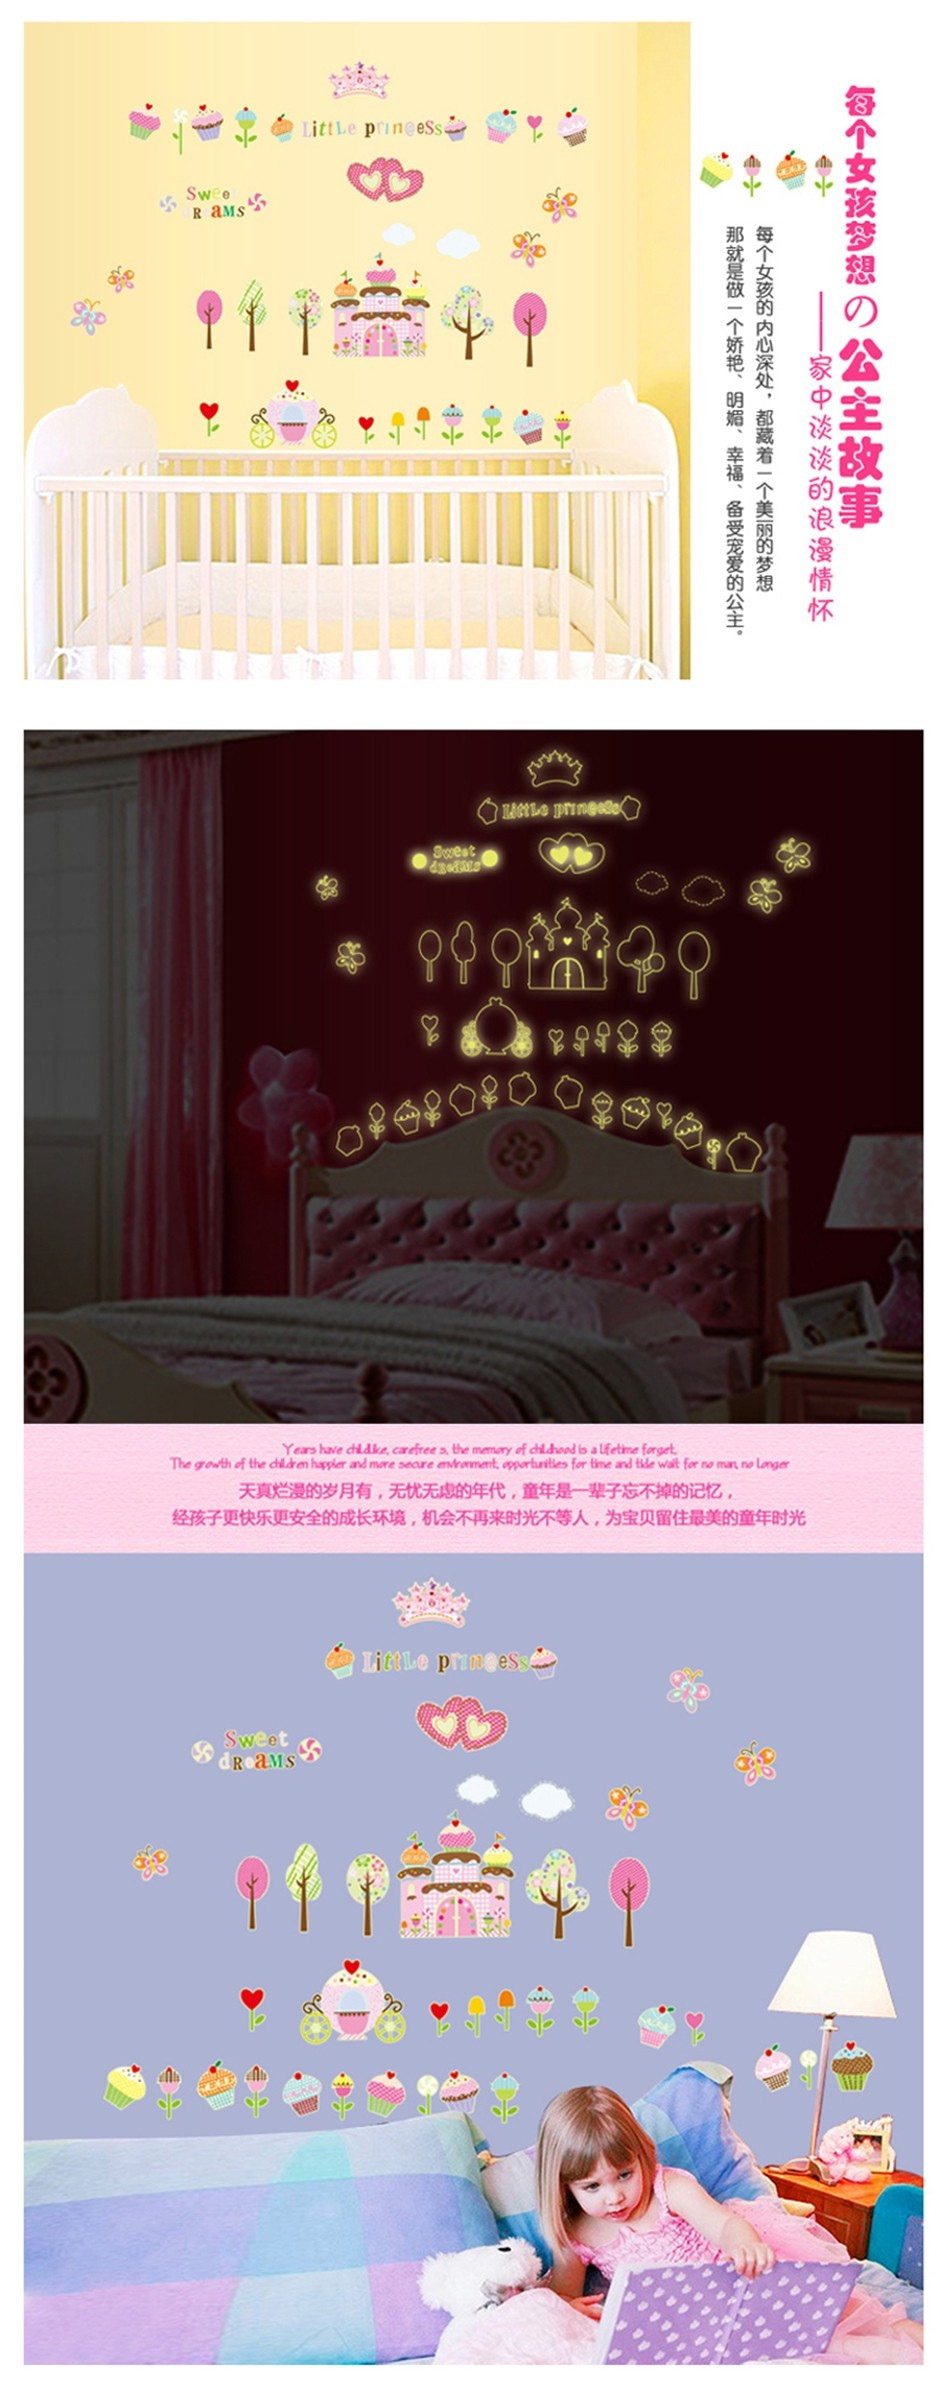 25 attractive Princess House Flower Vase 2024 free download princess house flower vase of ac283c2beic2bcc2beac296c2bdic2bcc2beic2bec289luminous glow princess house cartoon wall stickers glow intended for getsubject aeproduct